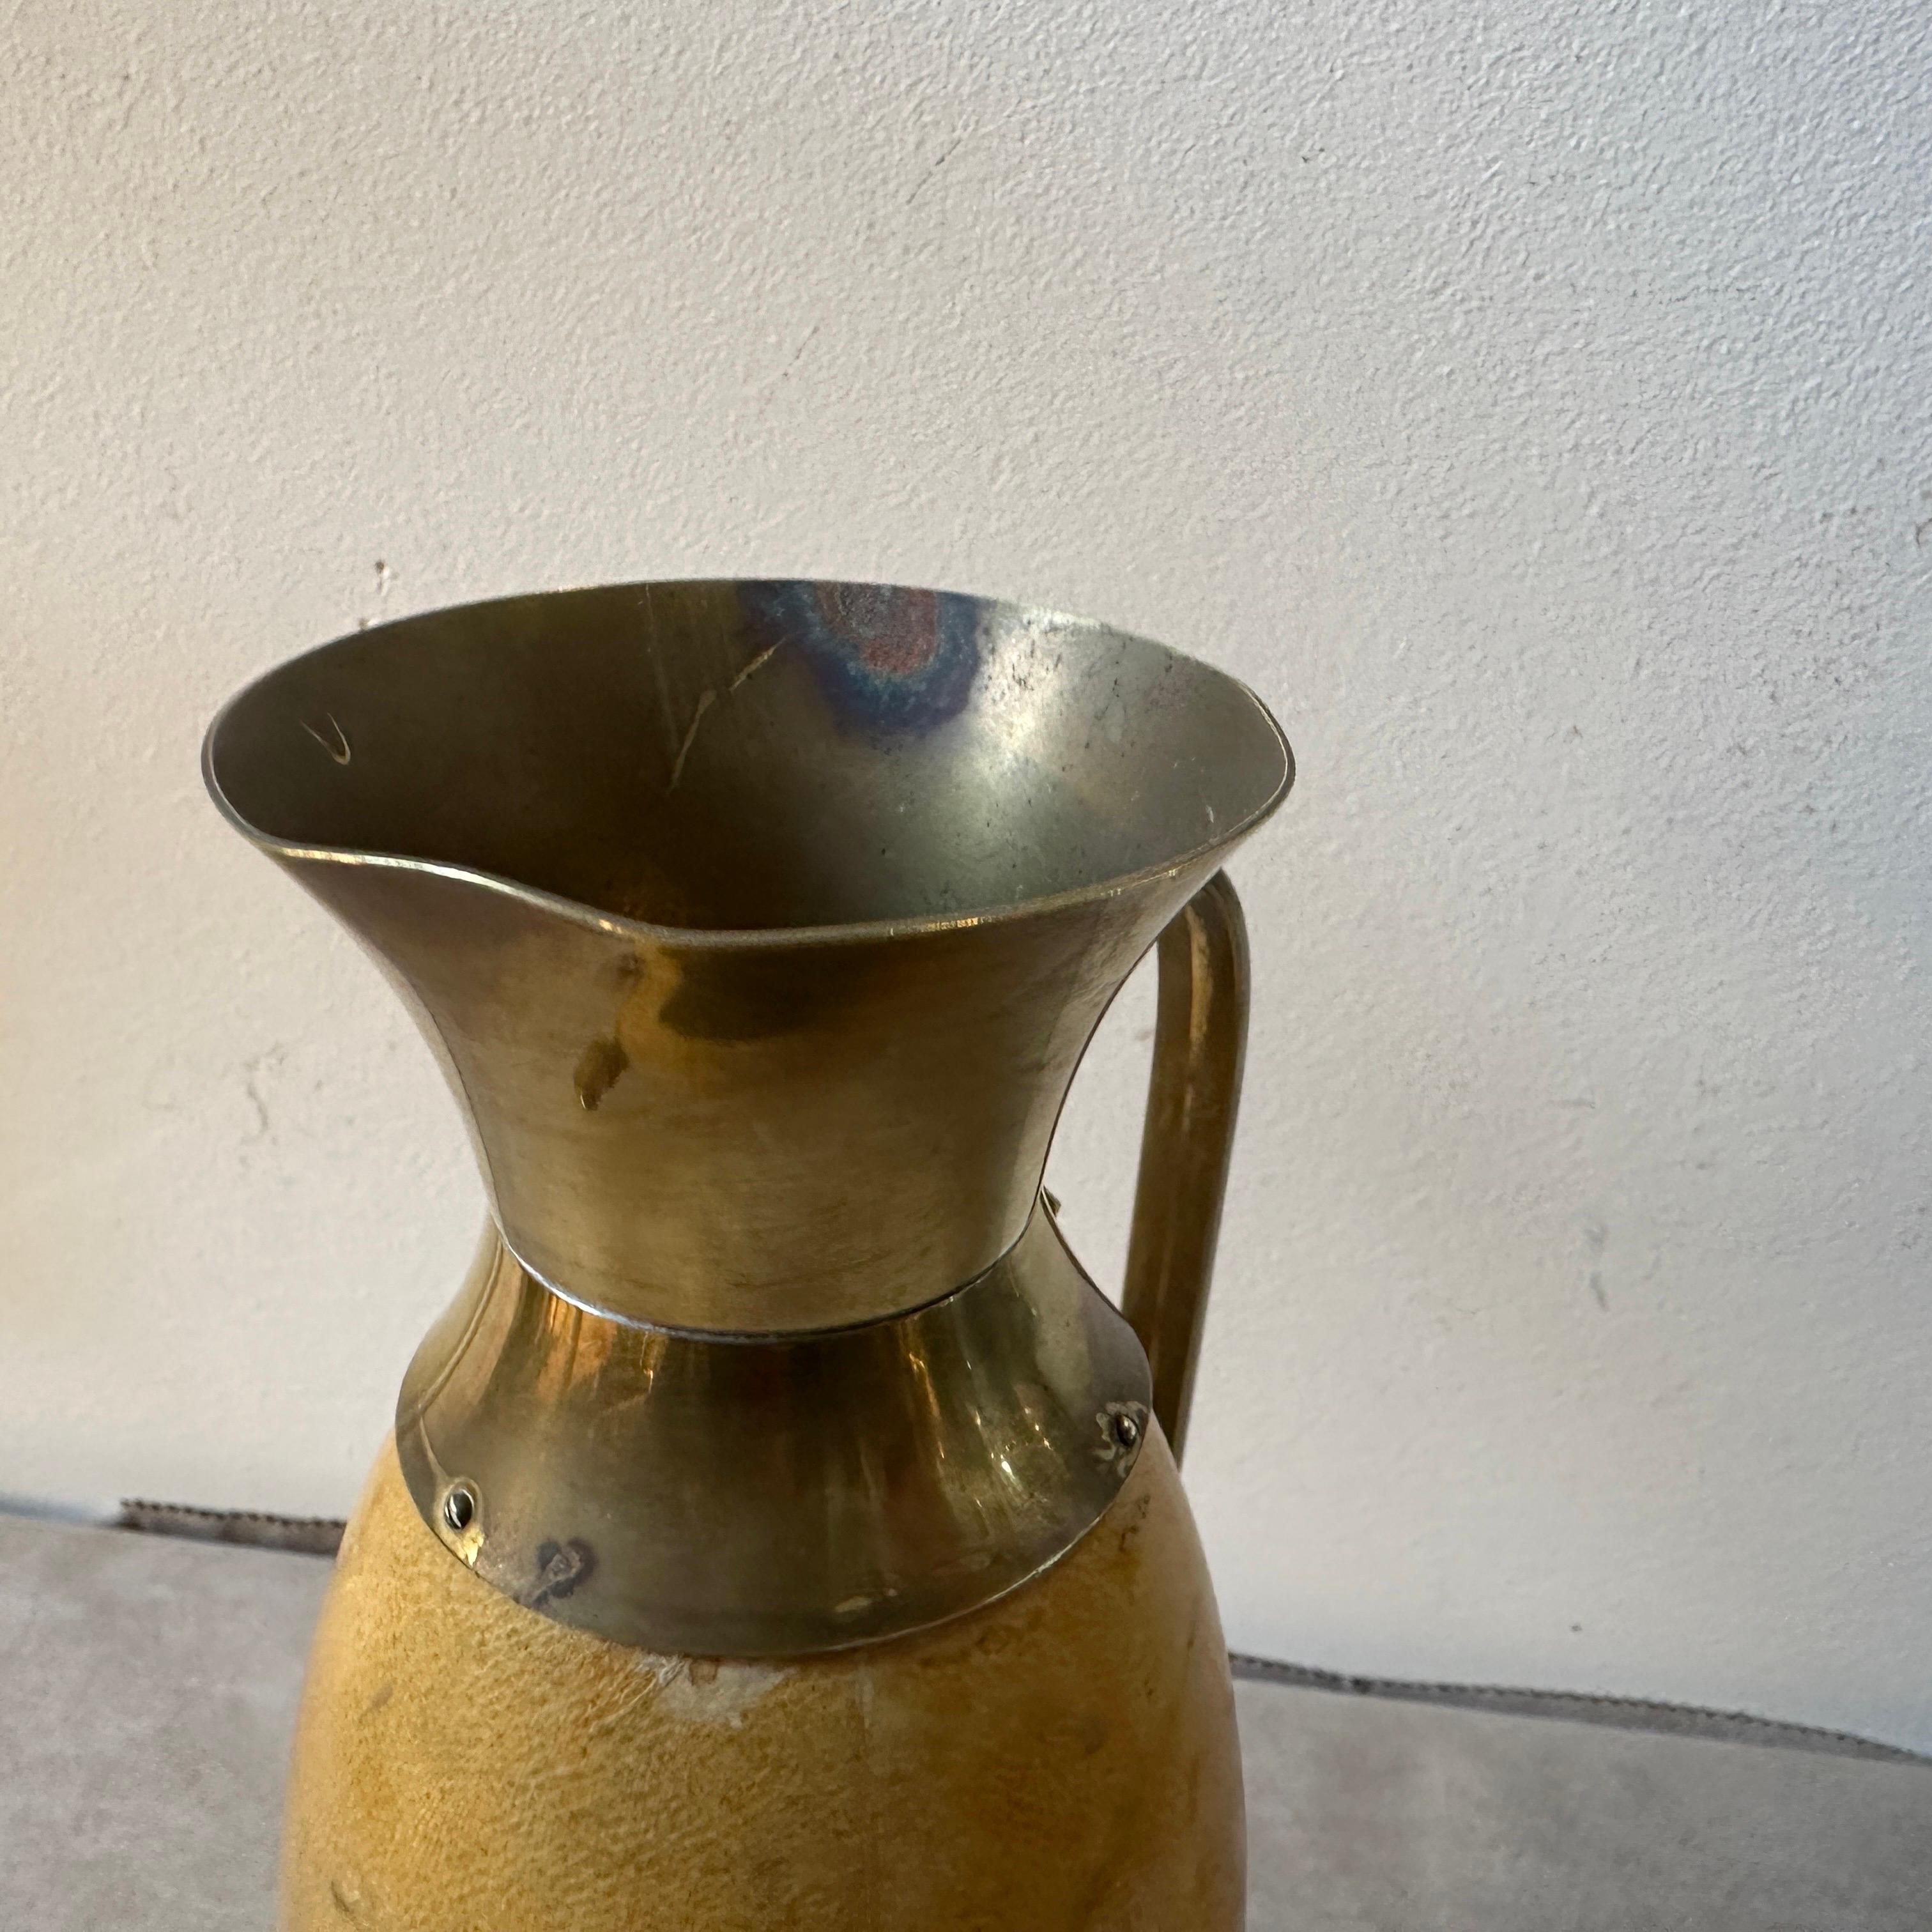 1950s Mid-Century Modern Goatskin and Brass Thermos Carafe by Aldo Tura For Sale 2